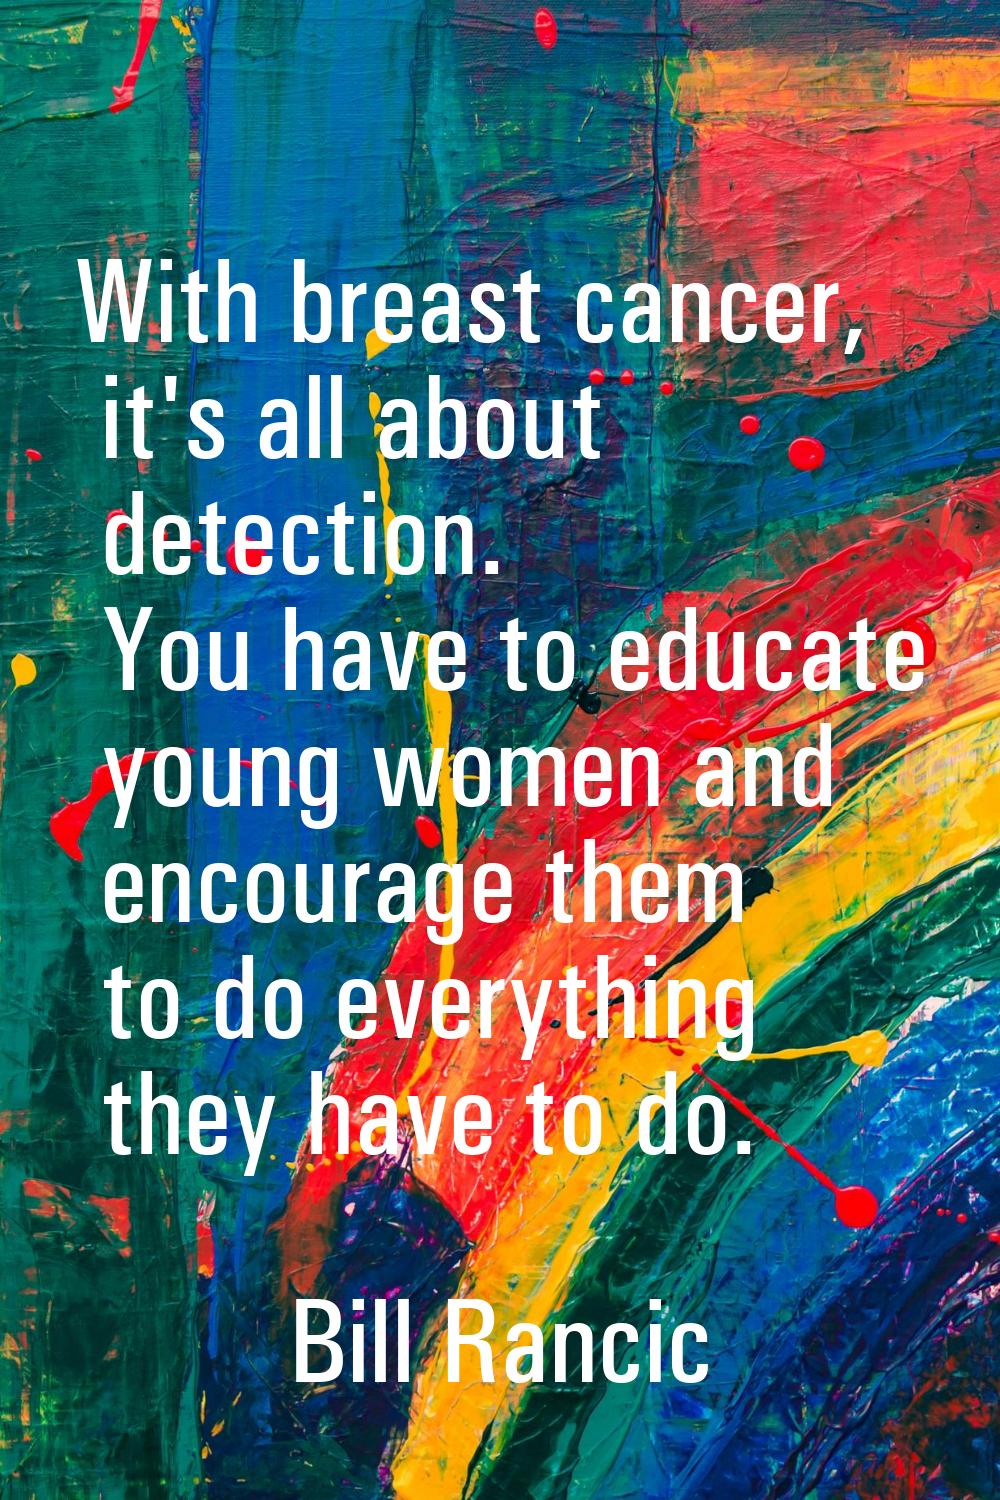 With breast cancer, it's all about detection. You have to educate young women and encourage them to